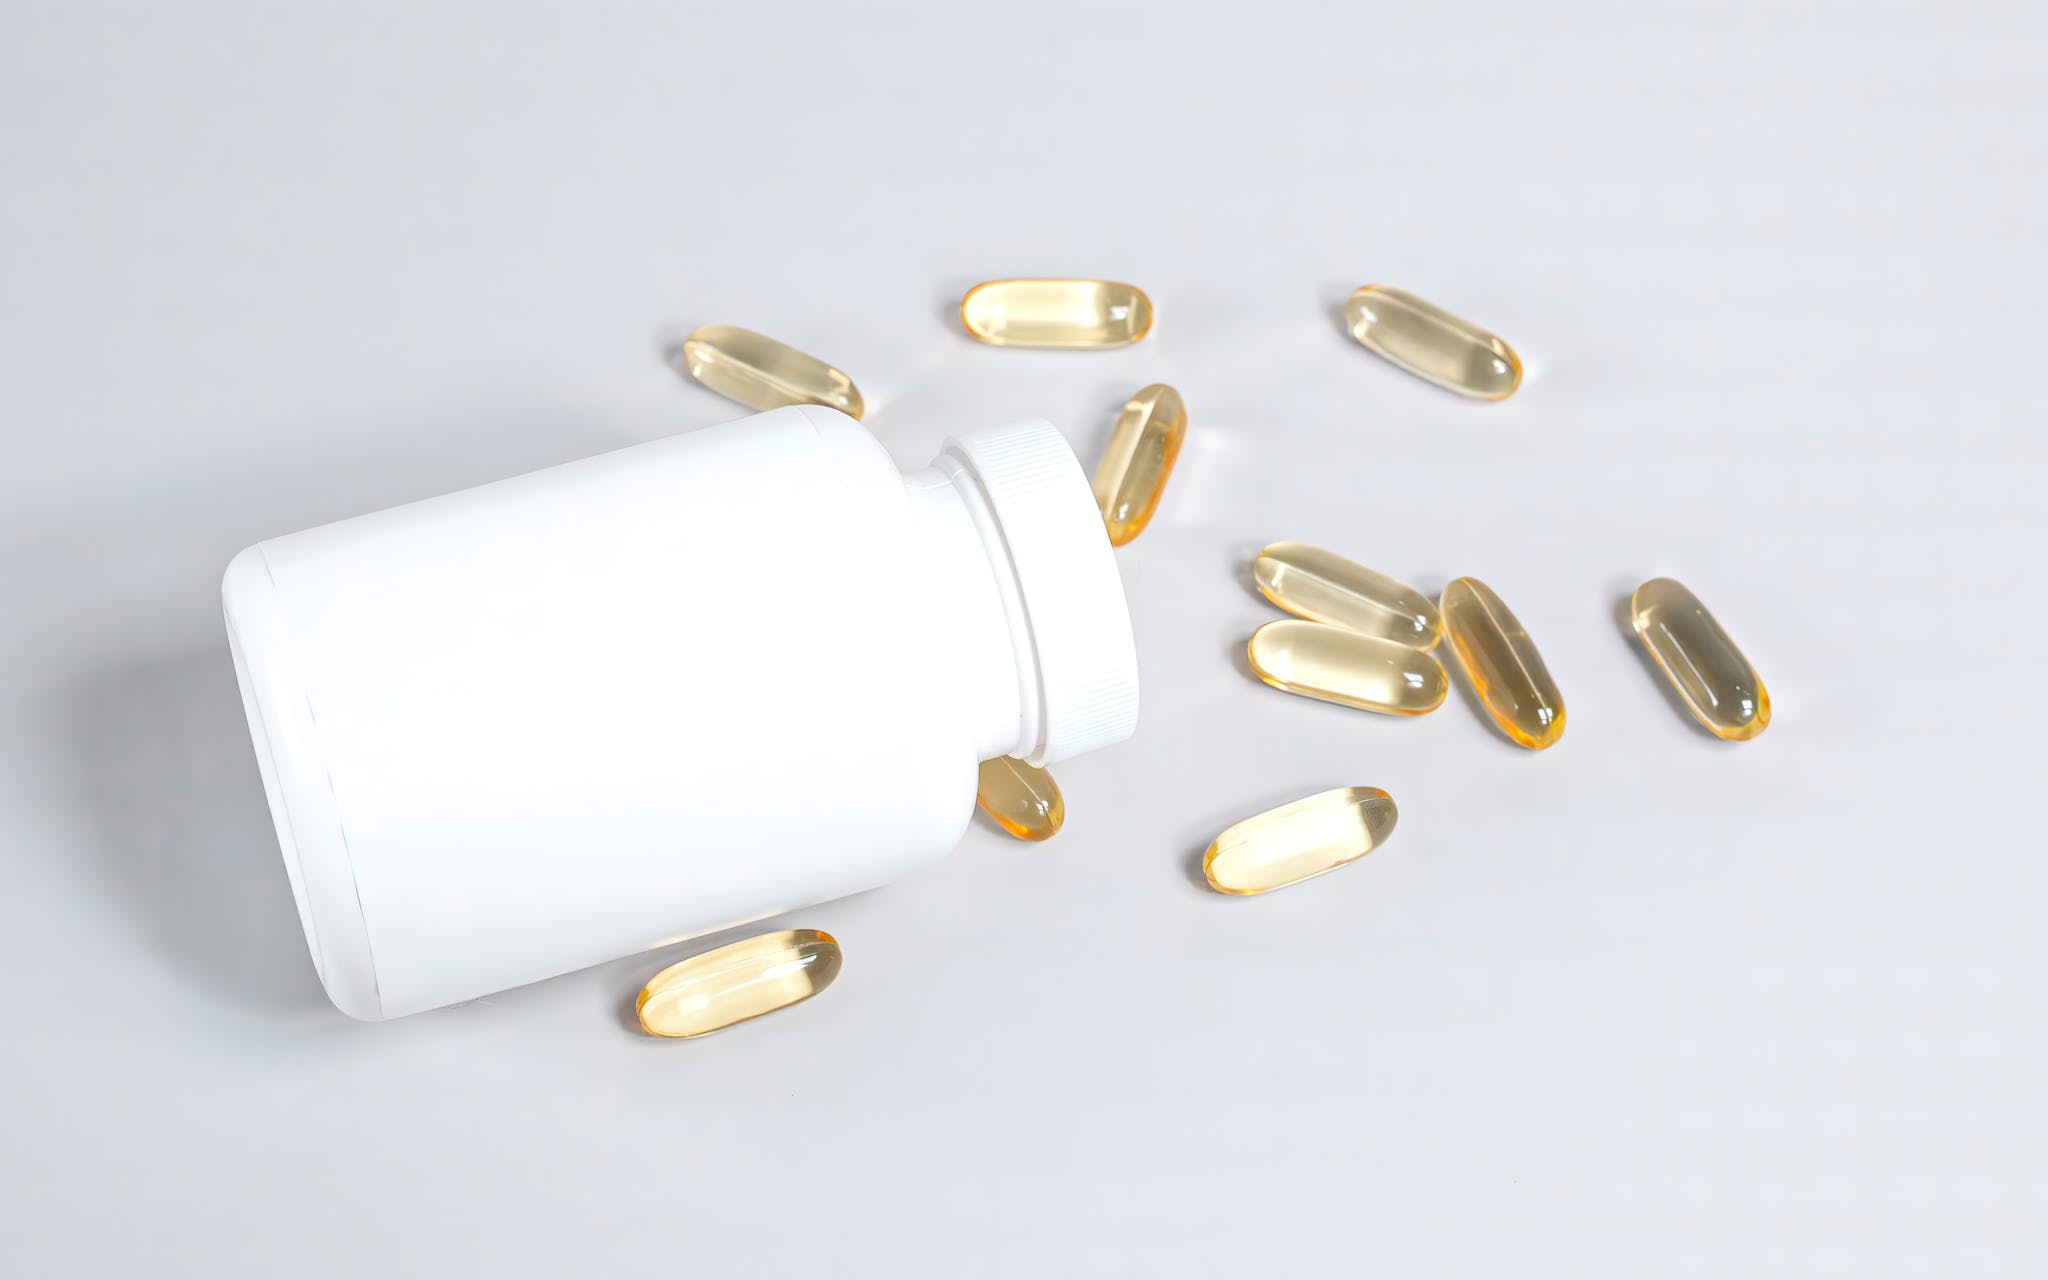 Best Fish Oil Supplement for Dry Eyes